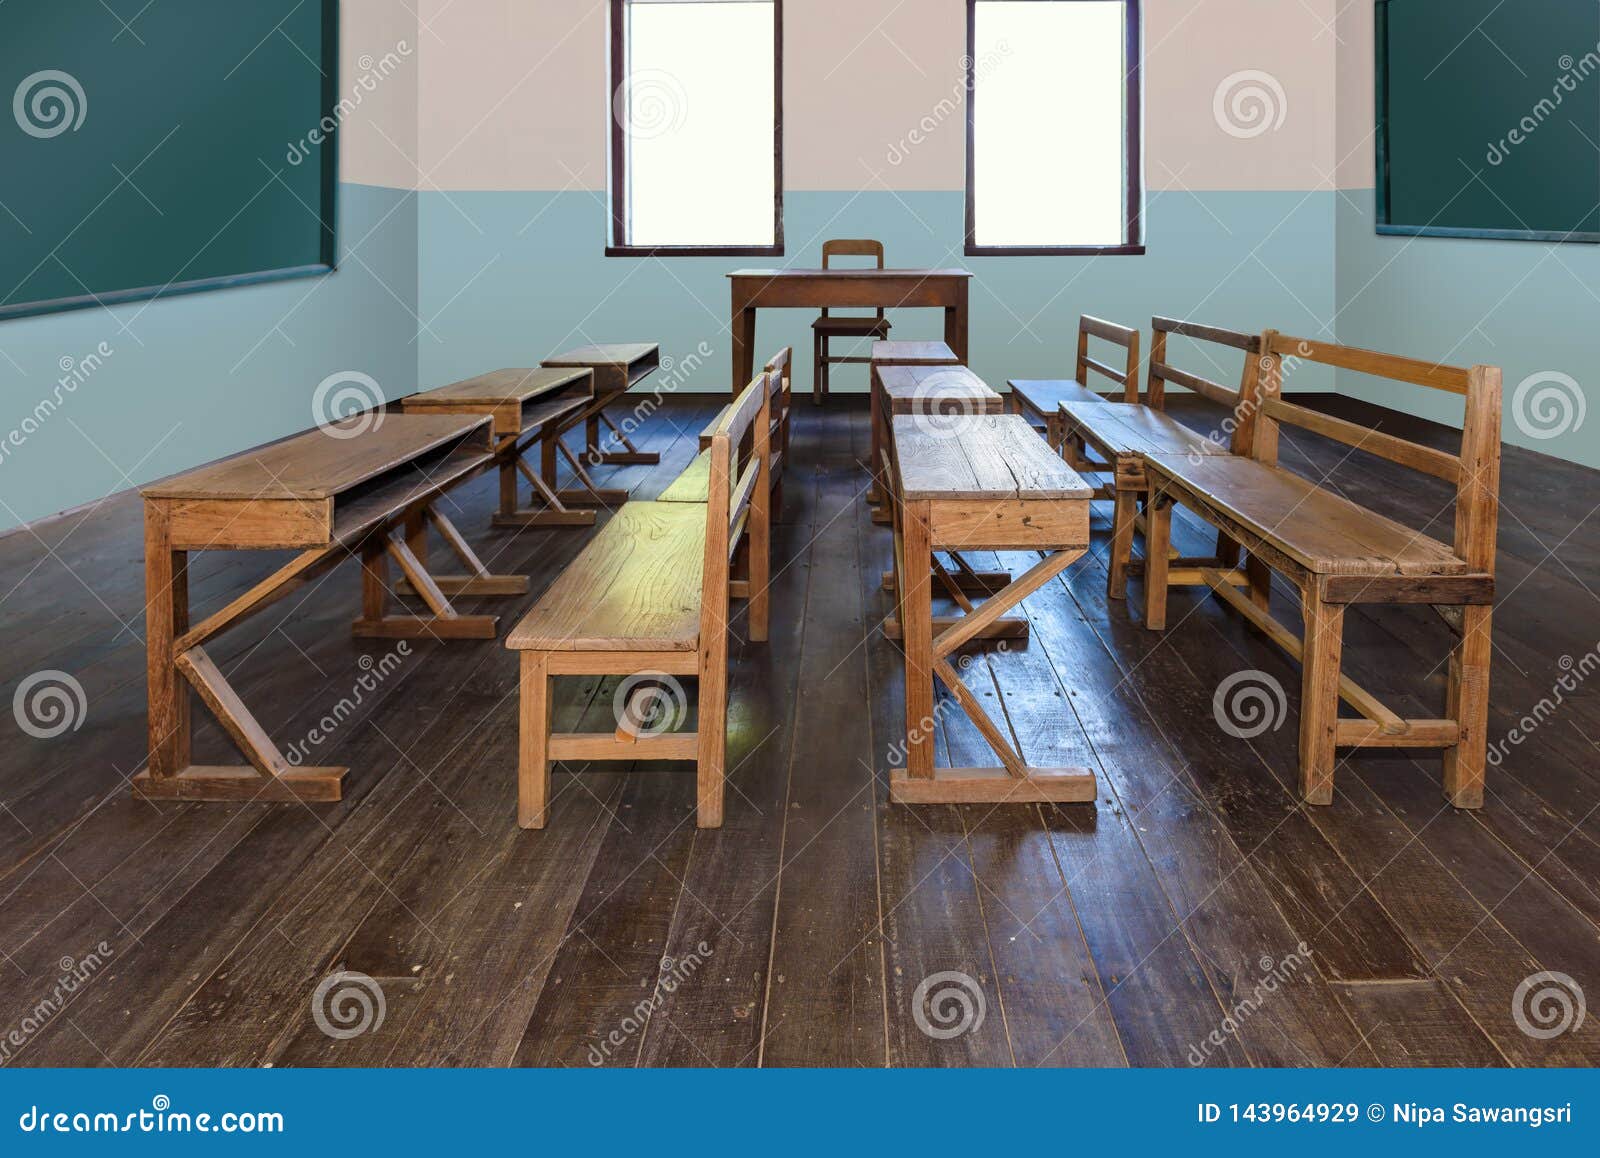 Antique Classroom In School With Rows Of Empty Wooden Desks Stock Image